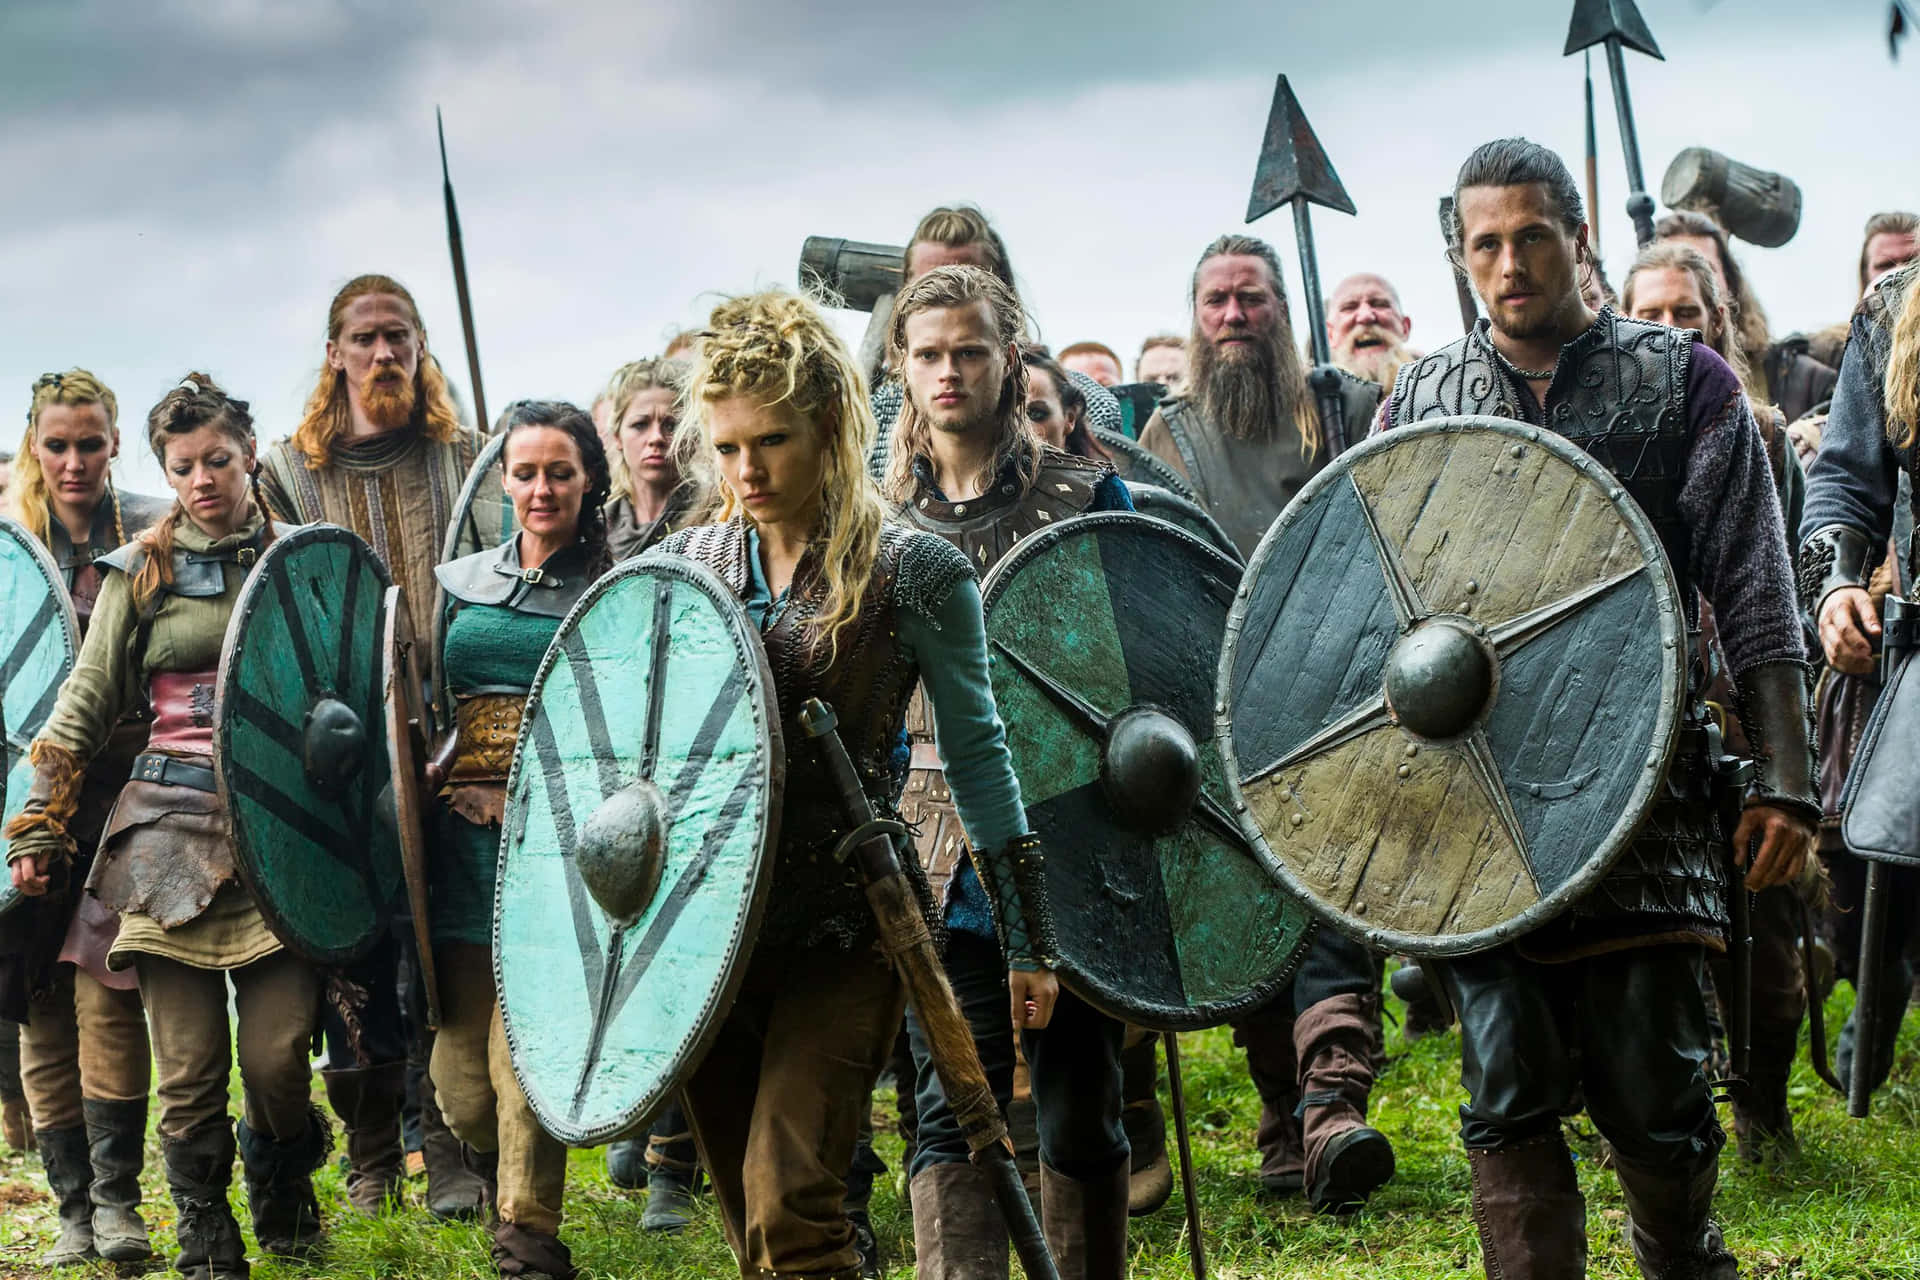 Emerald colored robes and war-slashed faces - Female Viking Warriors have endured the battle of time